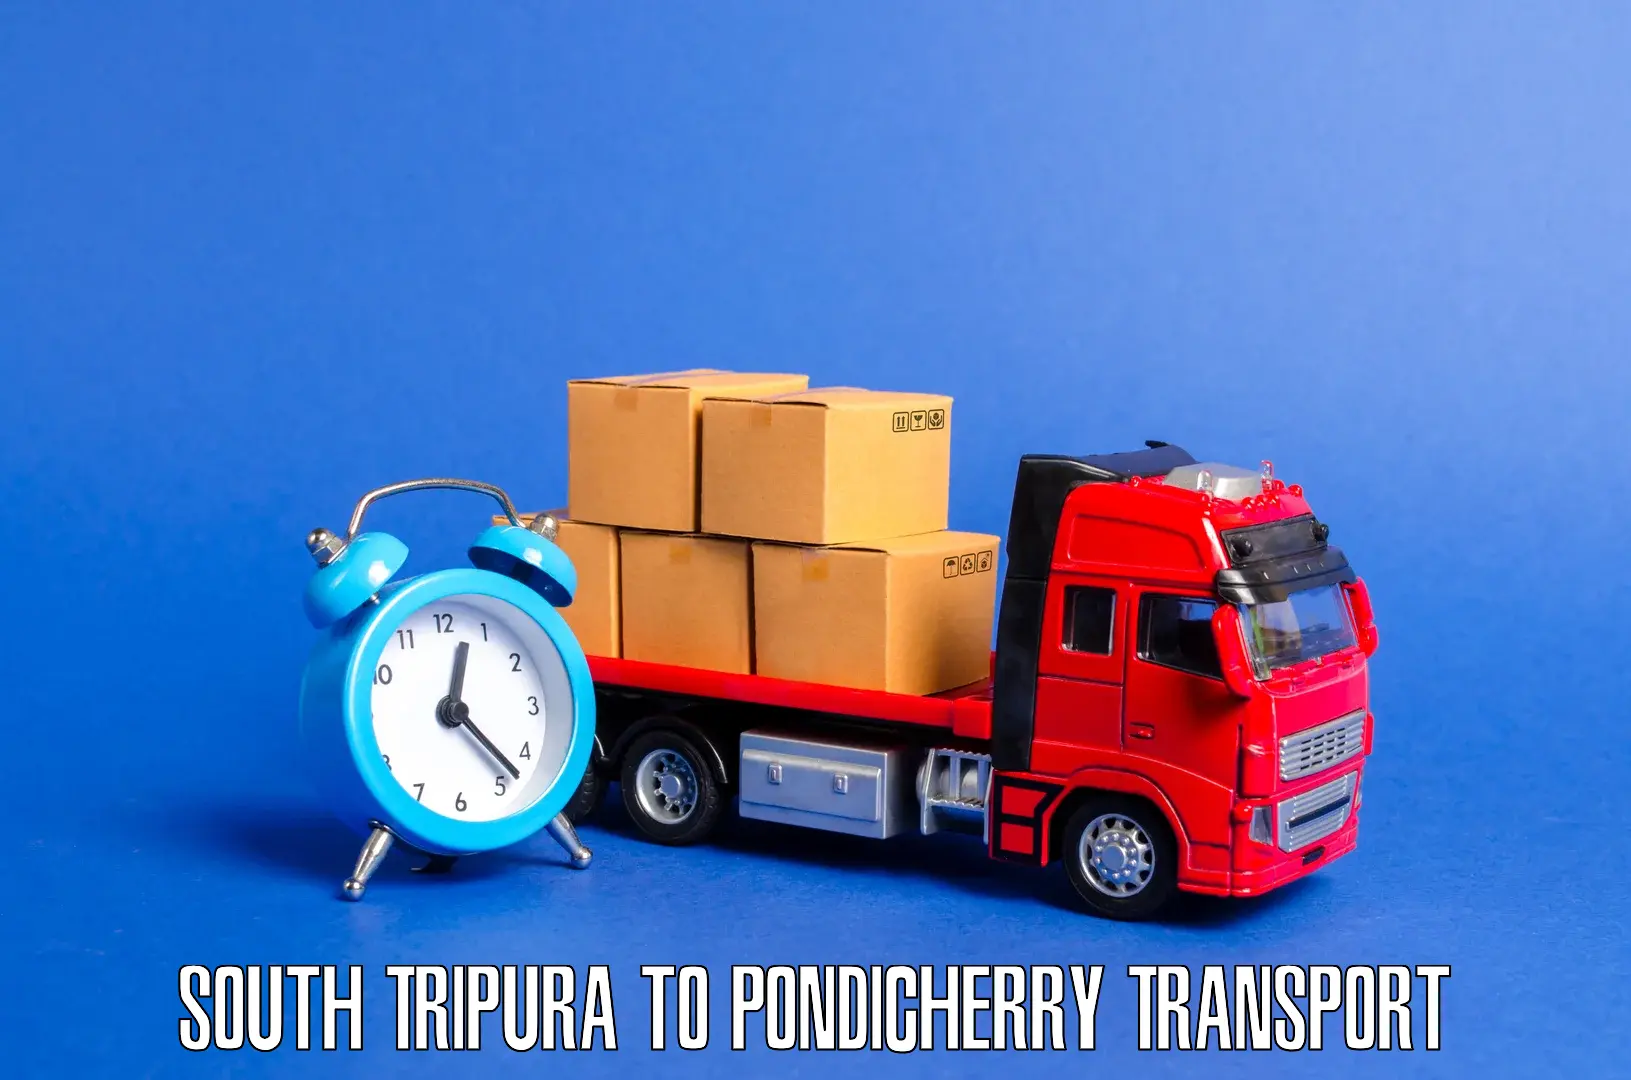 Transport shared services in South Tripura to Metttupalayam